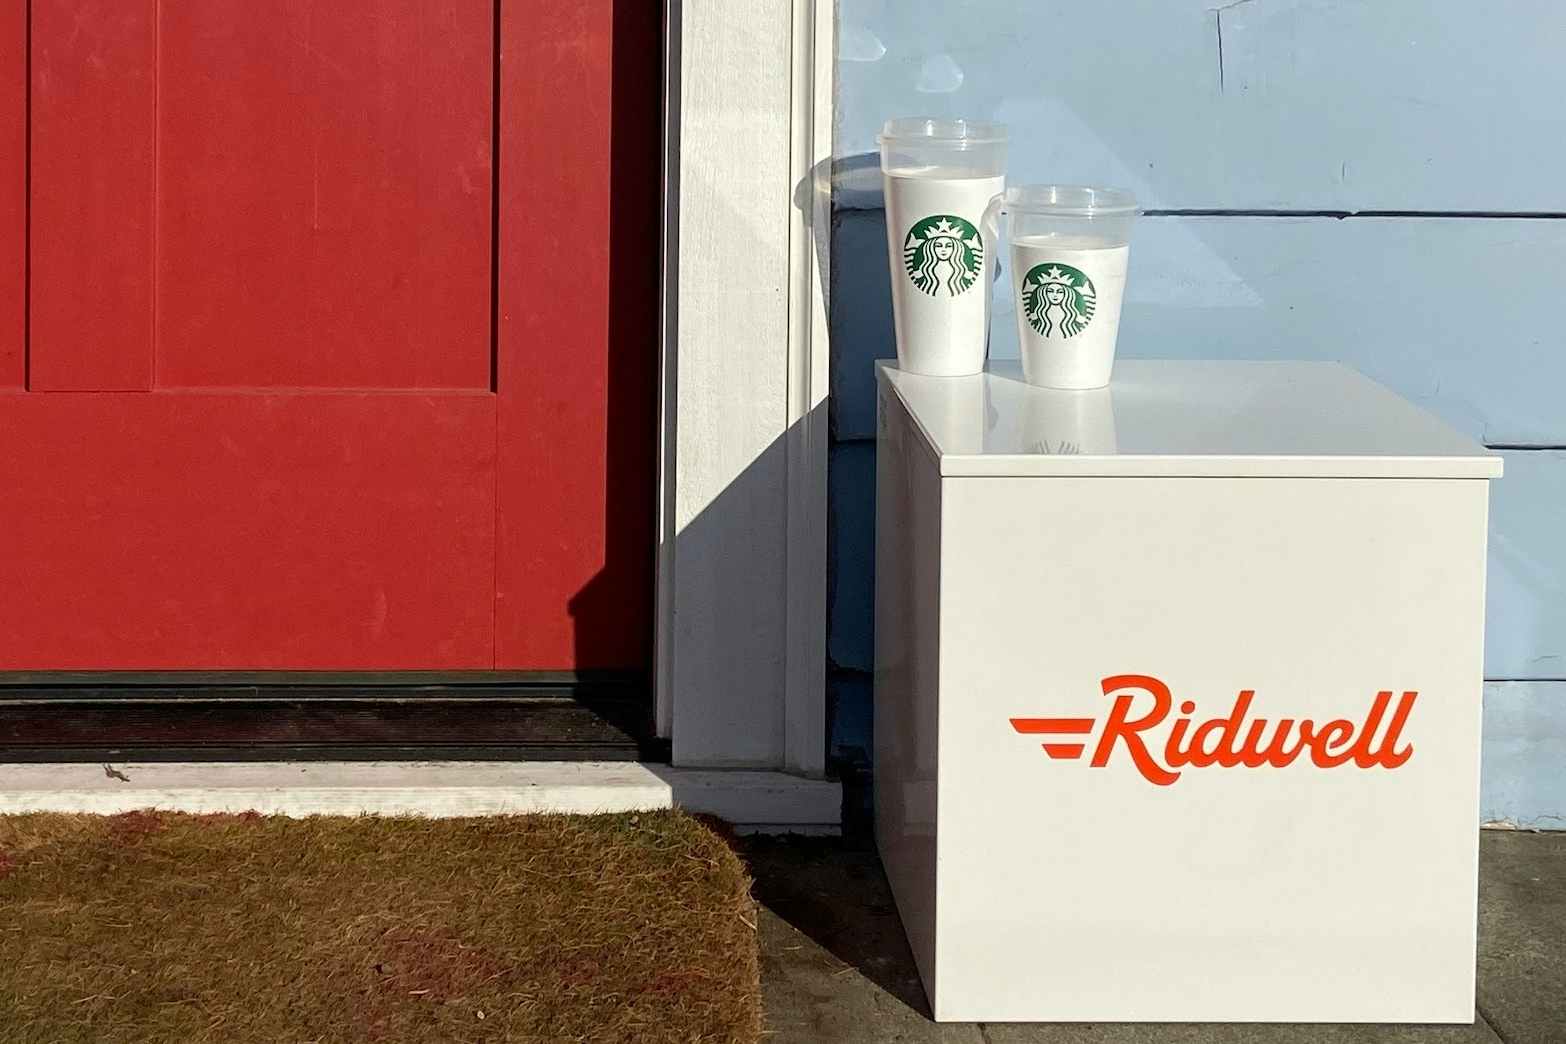 Two Starbucks cups on a box that said Ridwell next to a red front door.